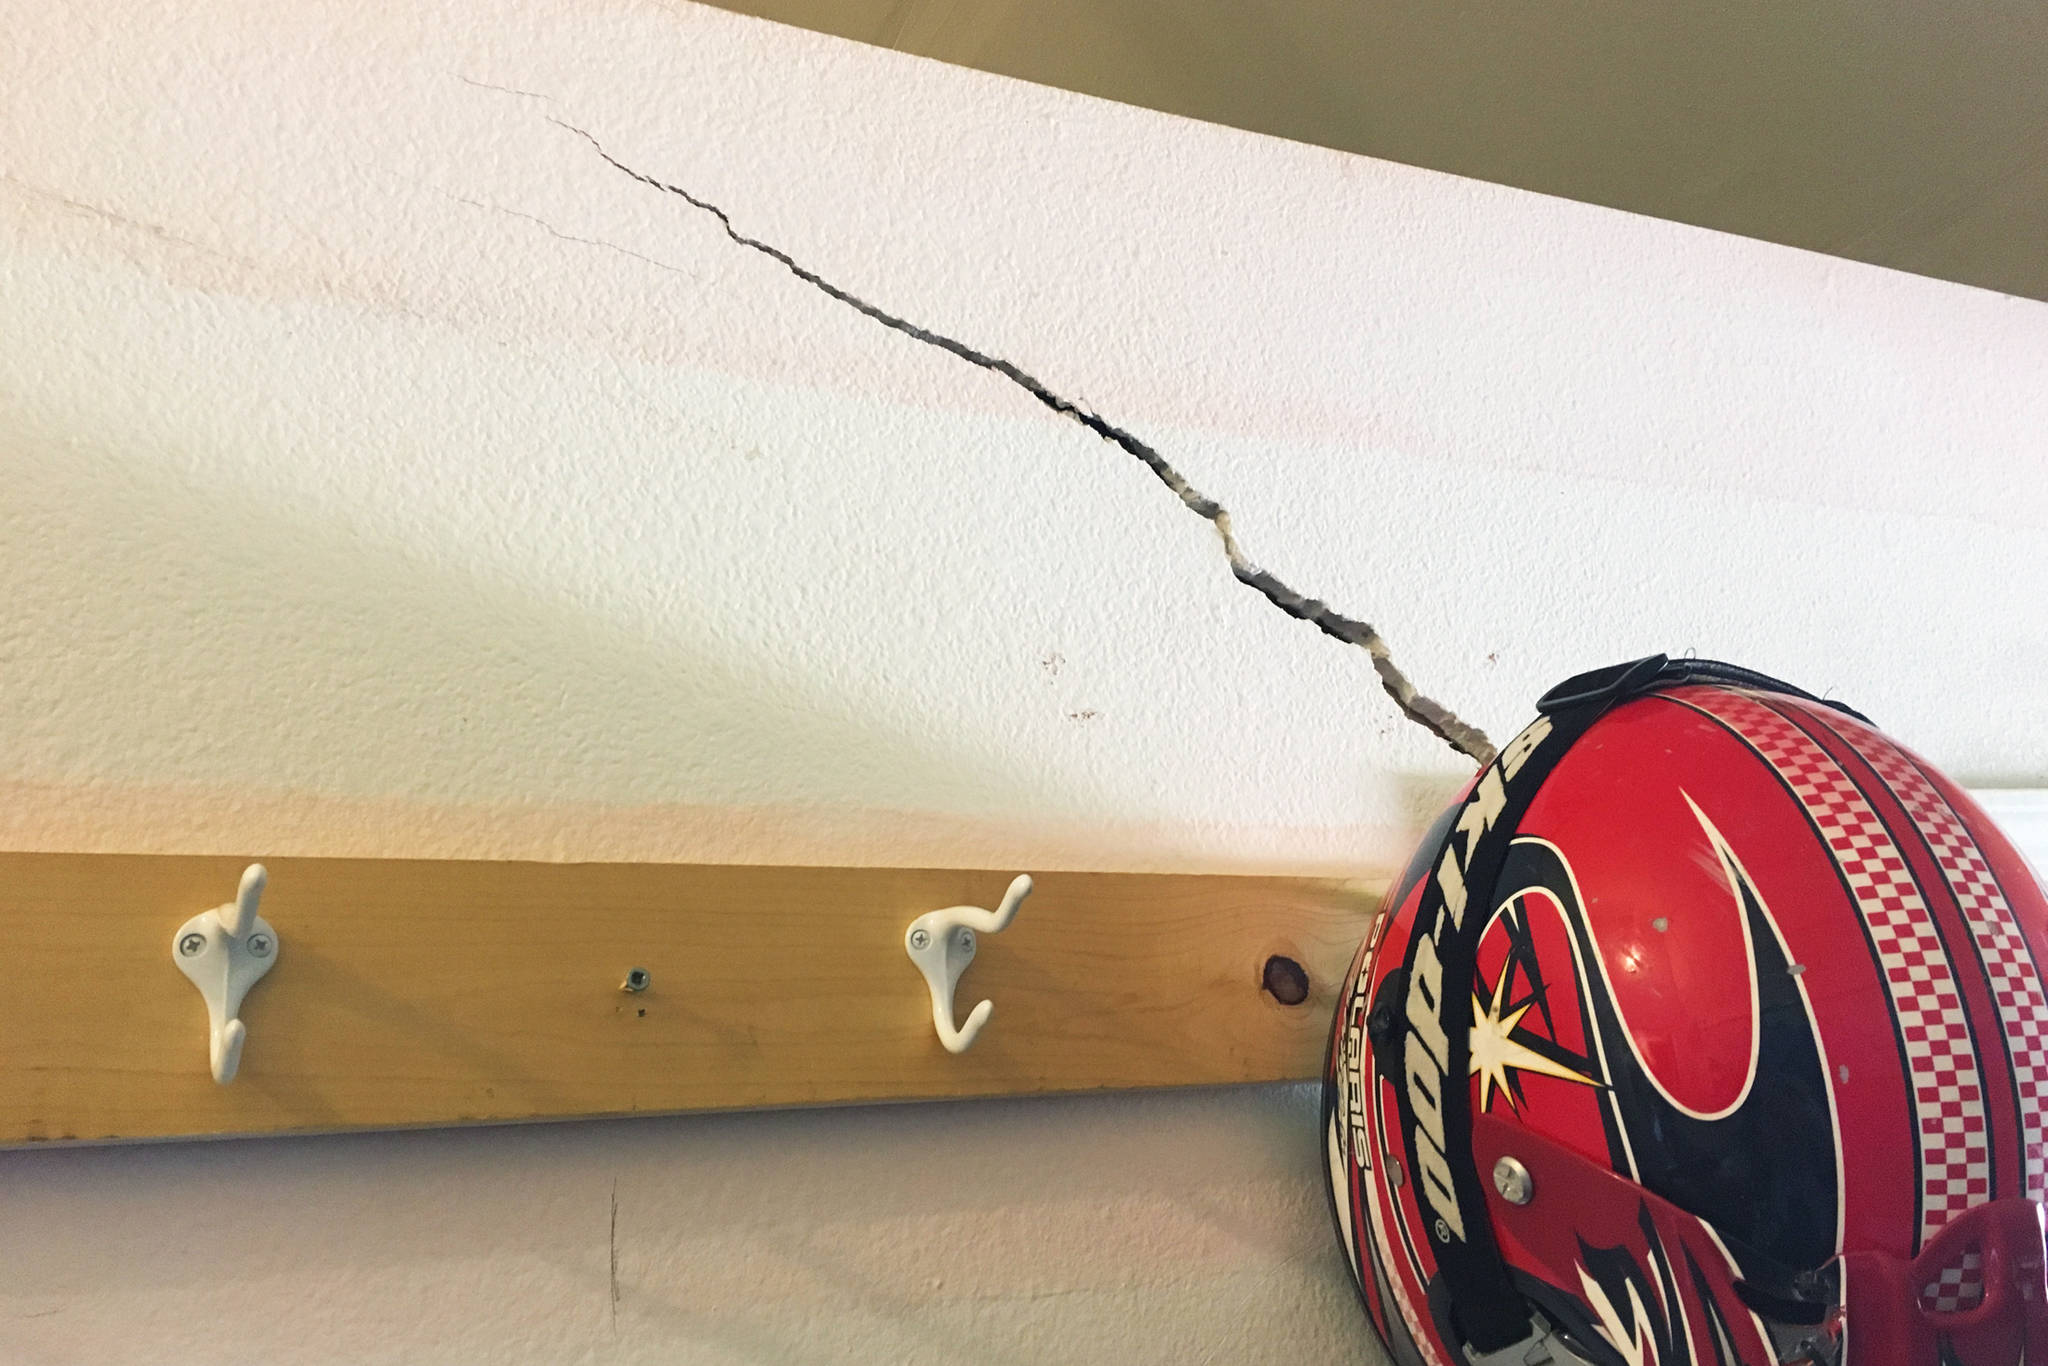 A crack rises up the wall near a coat hanger Thursday, Aug. 30, 2018 in the middle-high school building at Kachemak Selo School in the village at the head of Kachemak Bay, Alaska. The three buildings that make up the school facility have been experiencing structural and other issues for years. (Photo by Megan Pacer/Homer News)